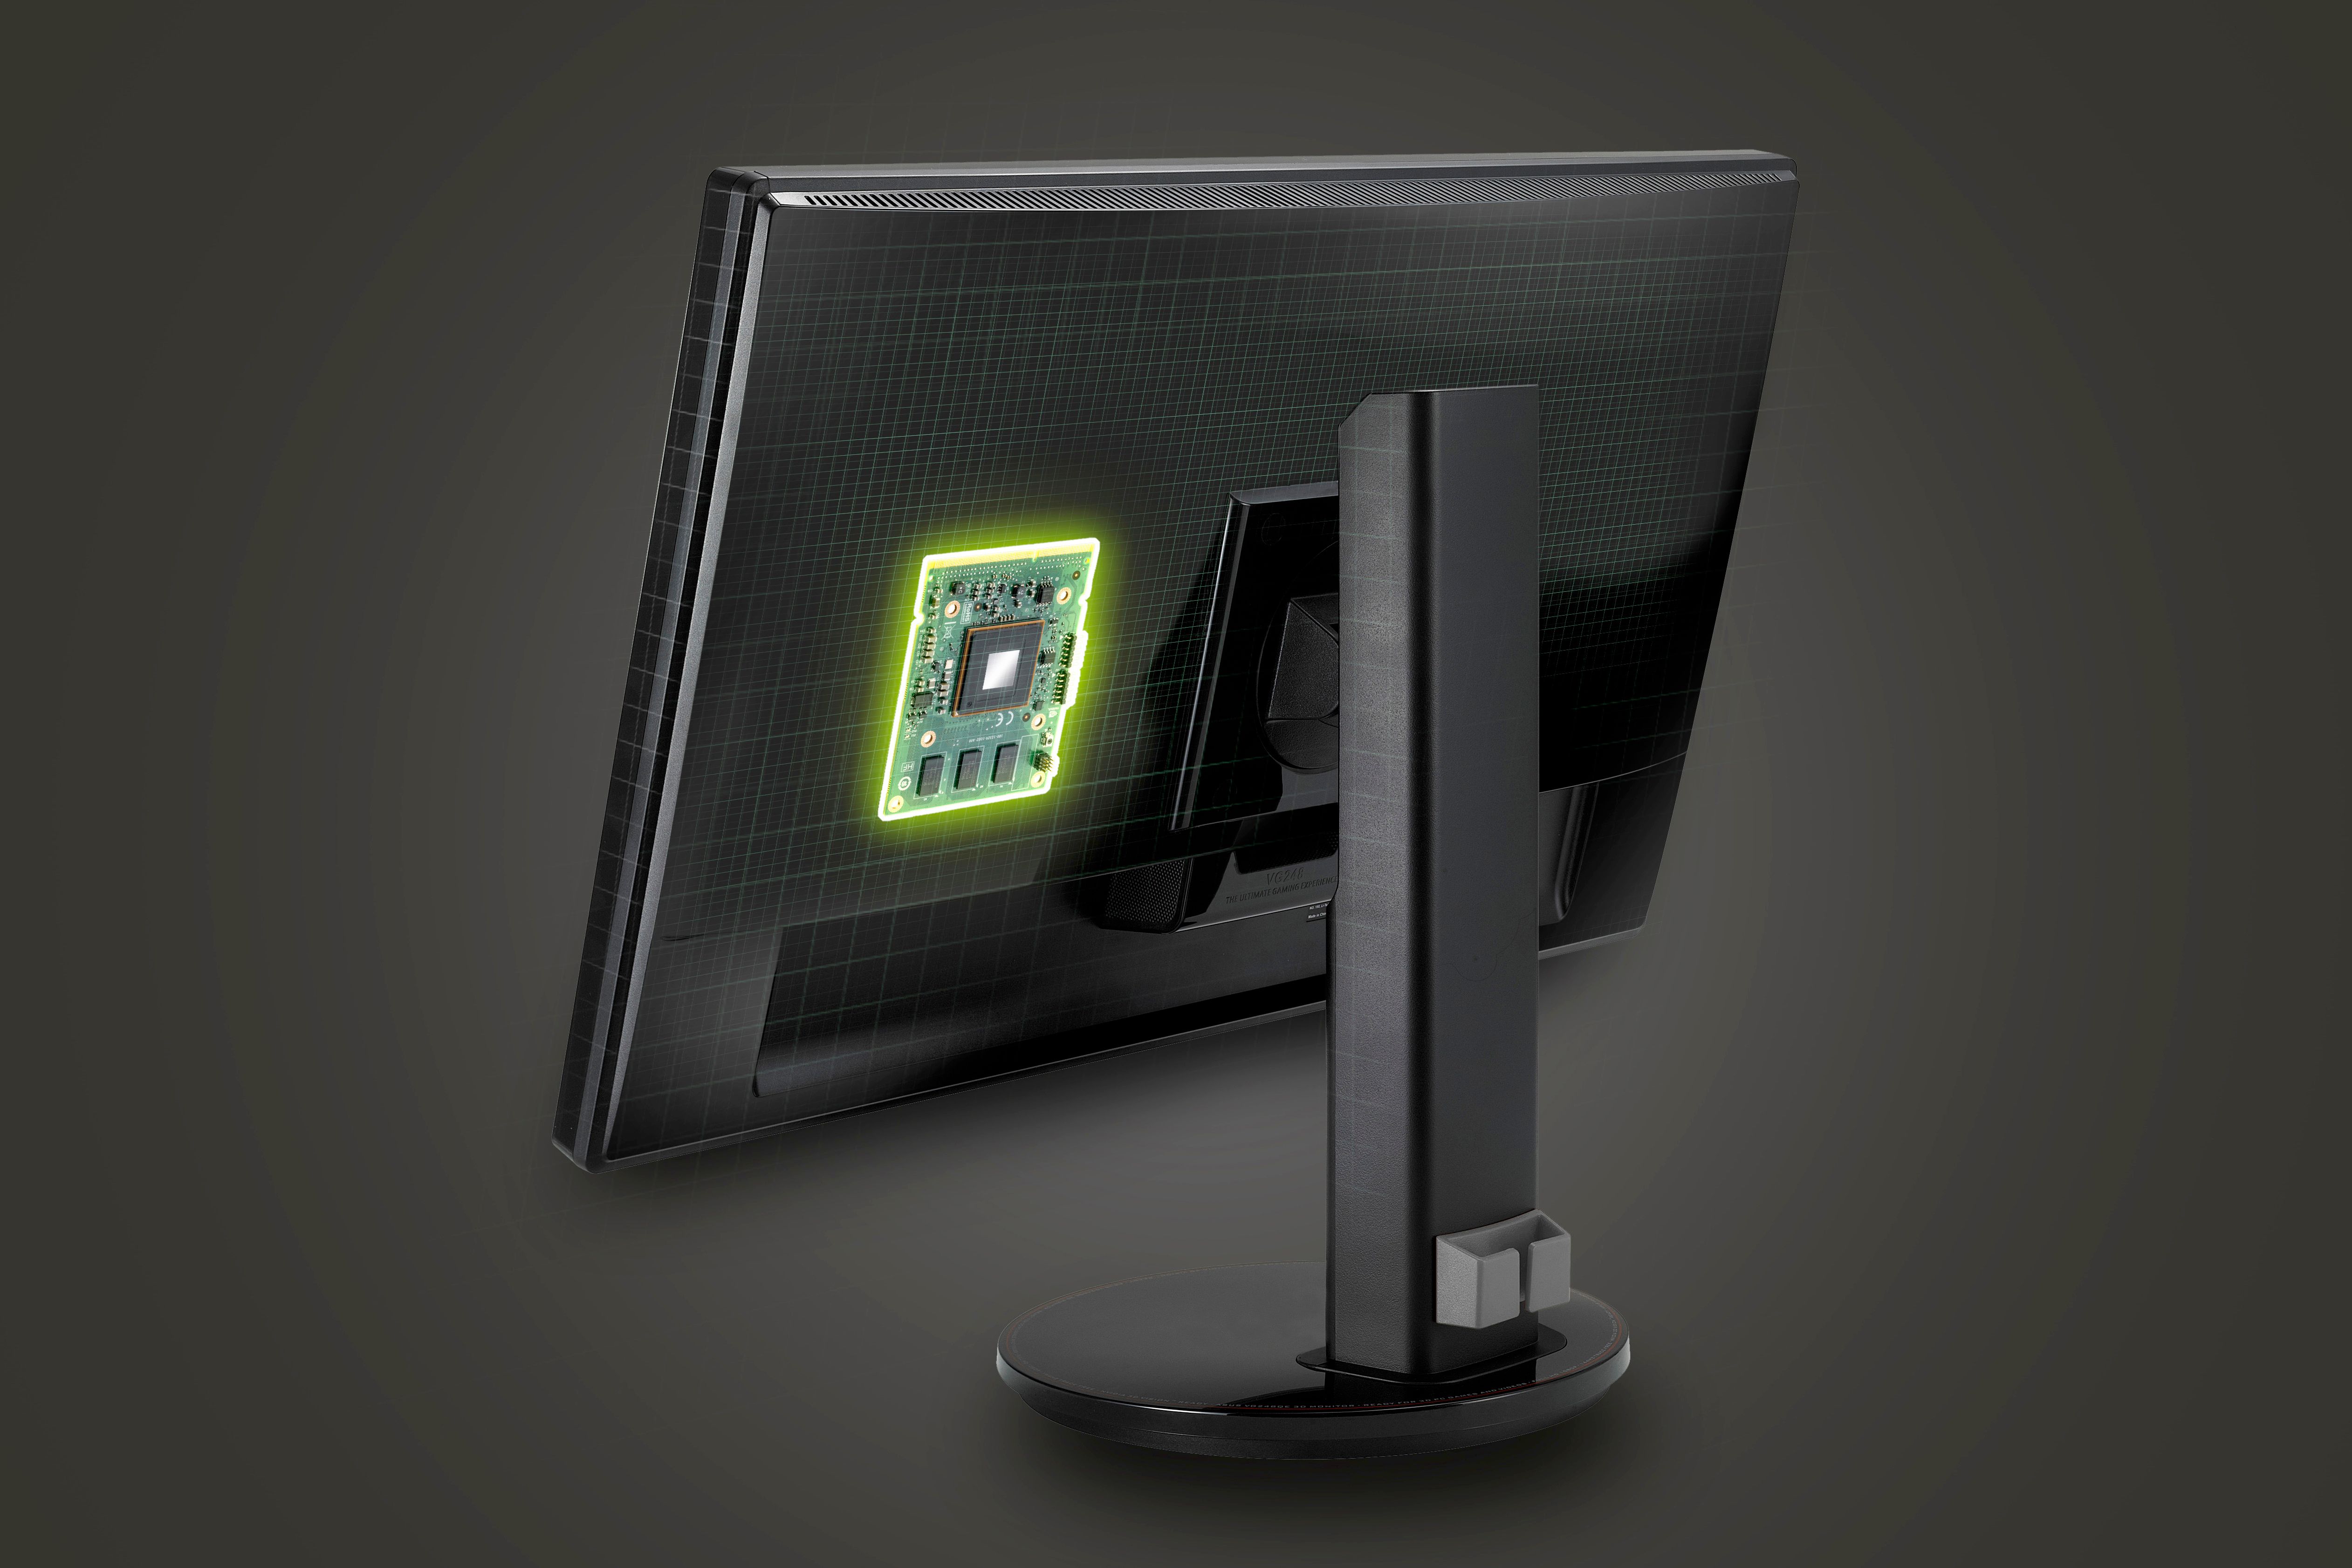 NVIDIA Monitor with G-Sync chip highlighted on the back.